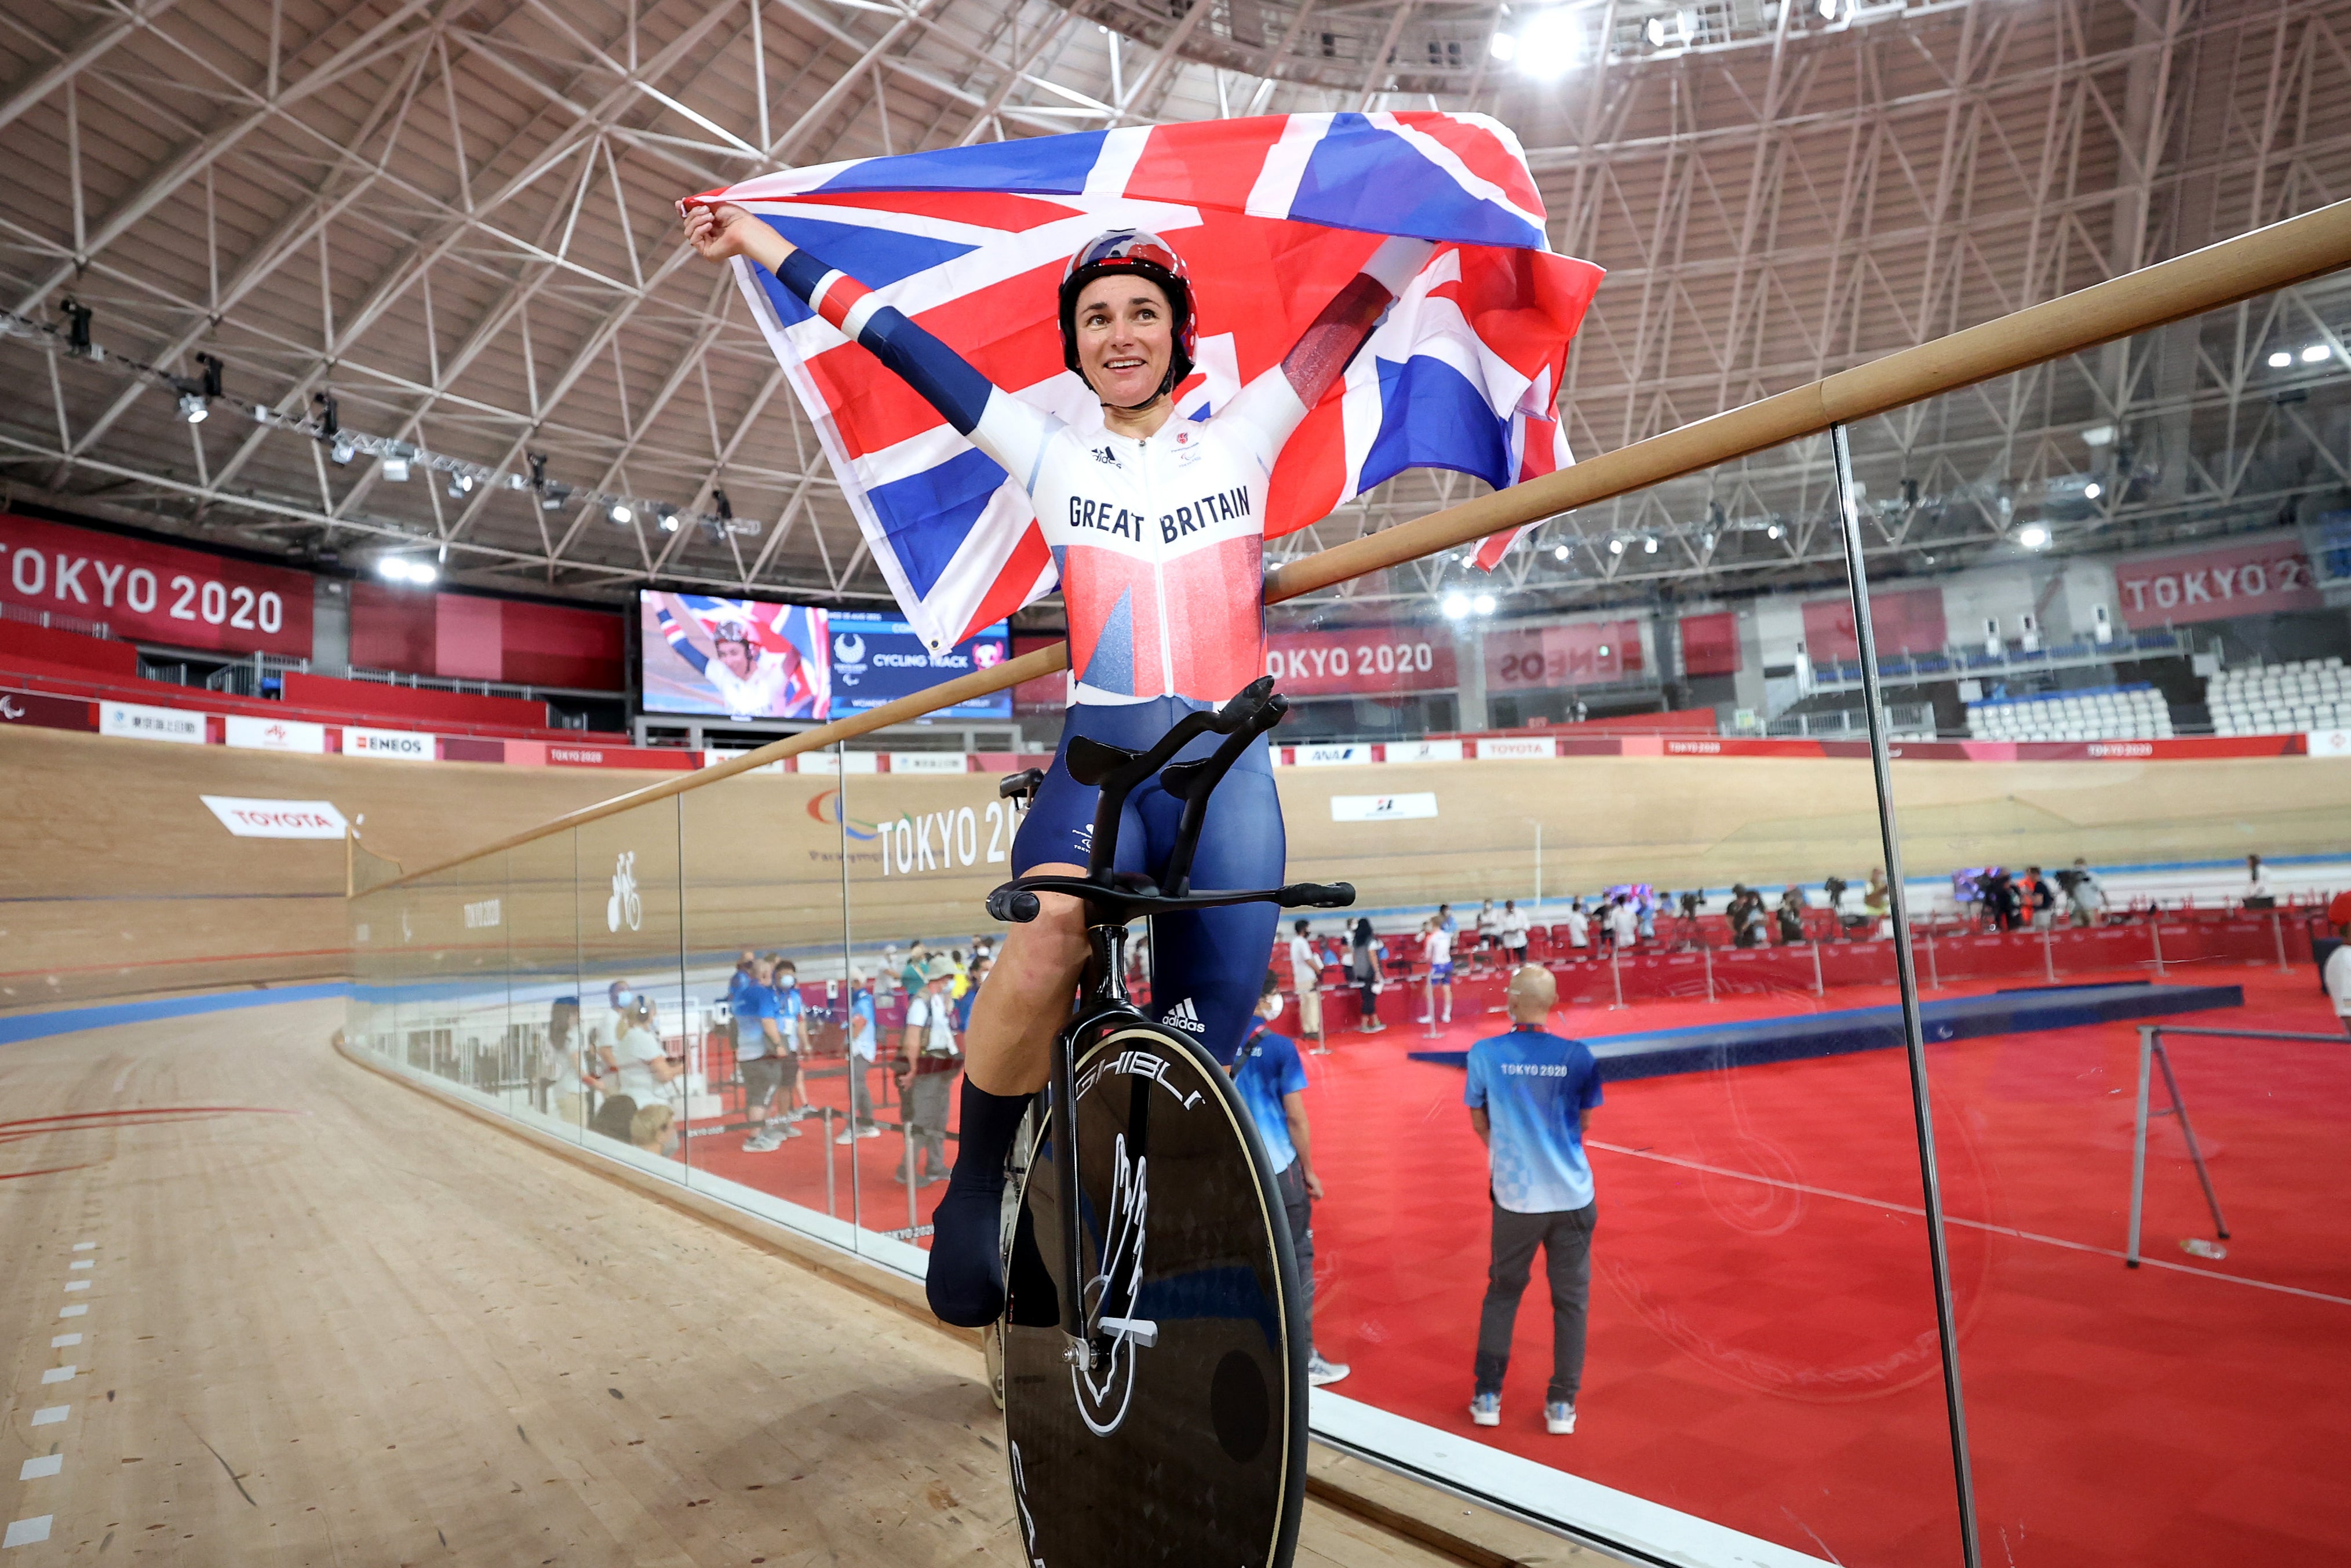 Dame Sarah Storey is a 17-time PAralympic gold medallist